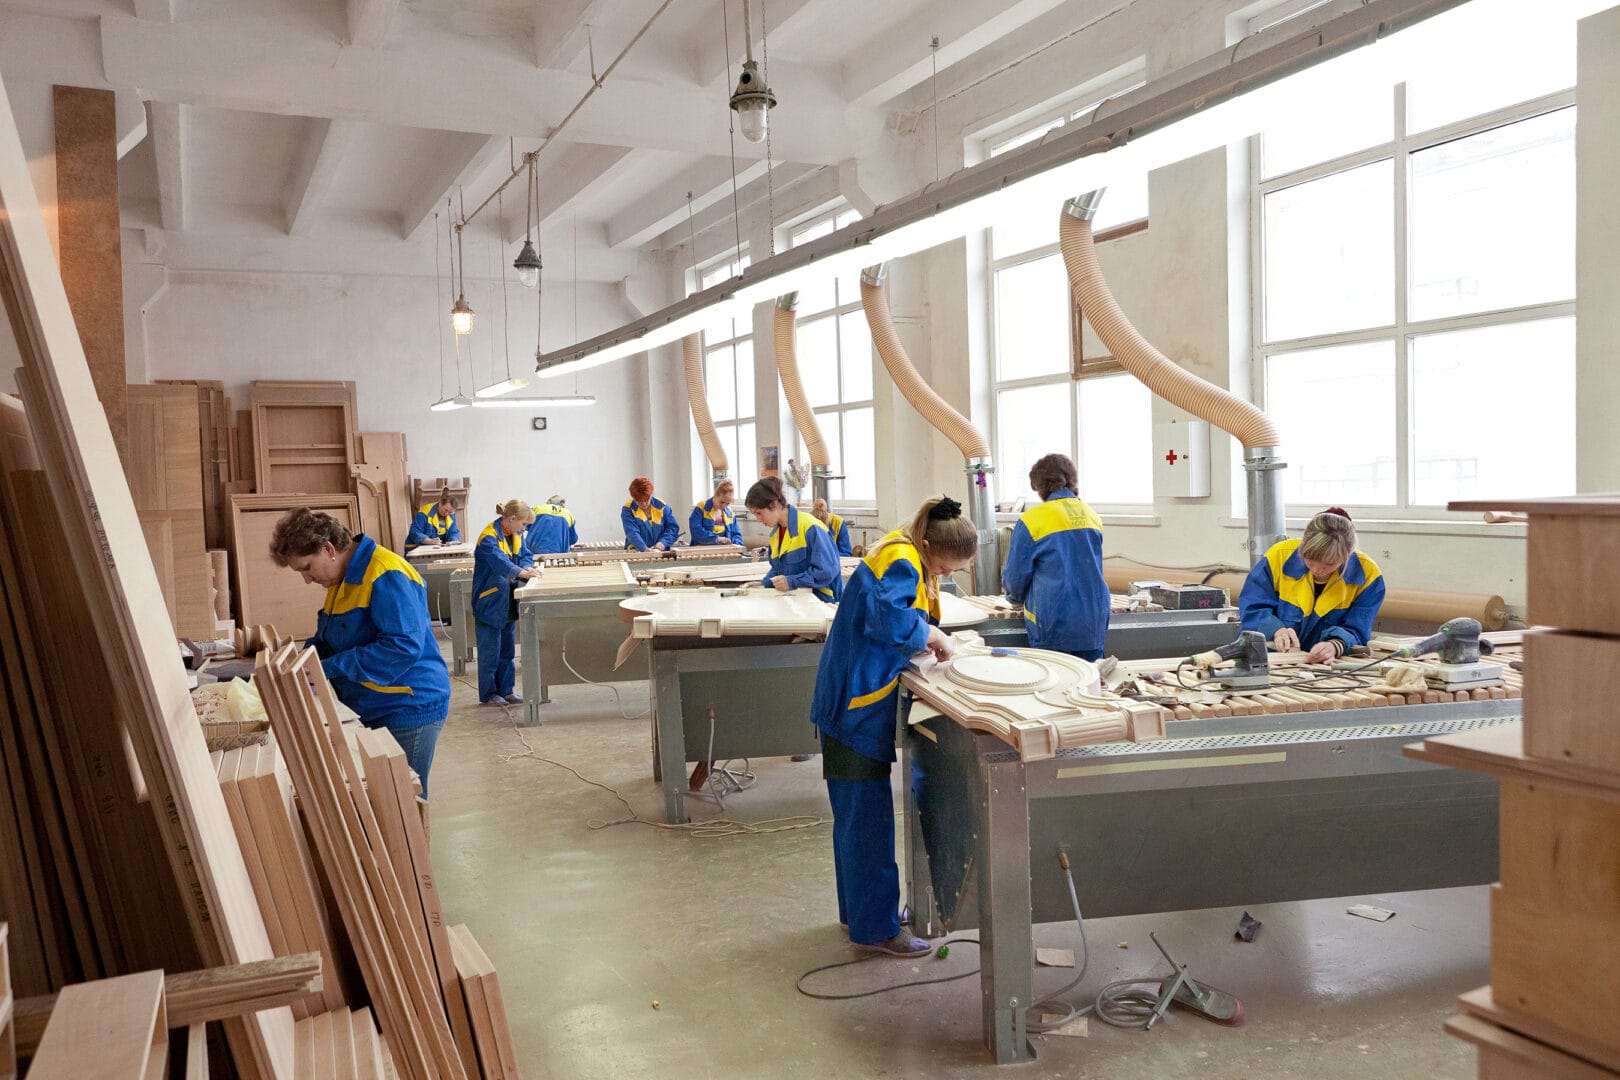 Employees of Furniture Factory MIRT during the furniture manufacturing process